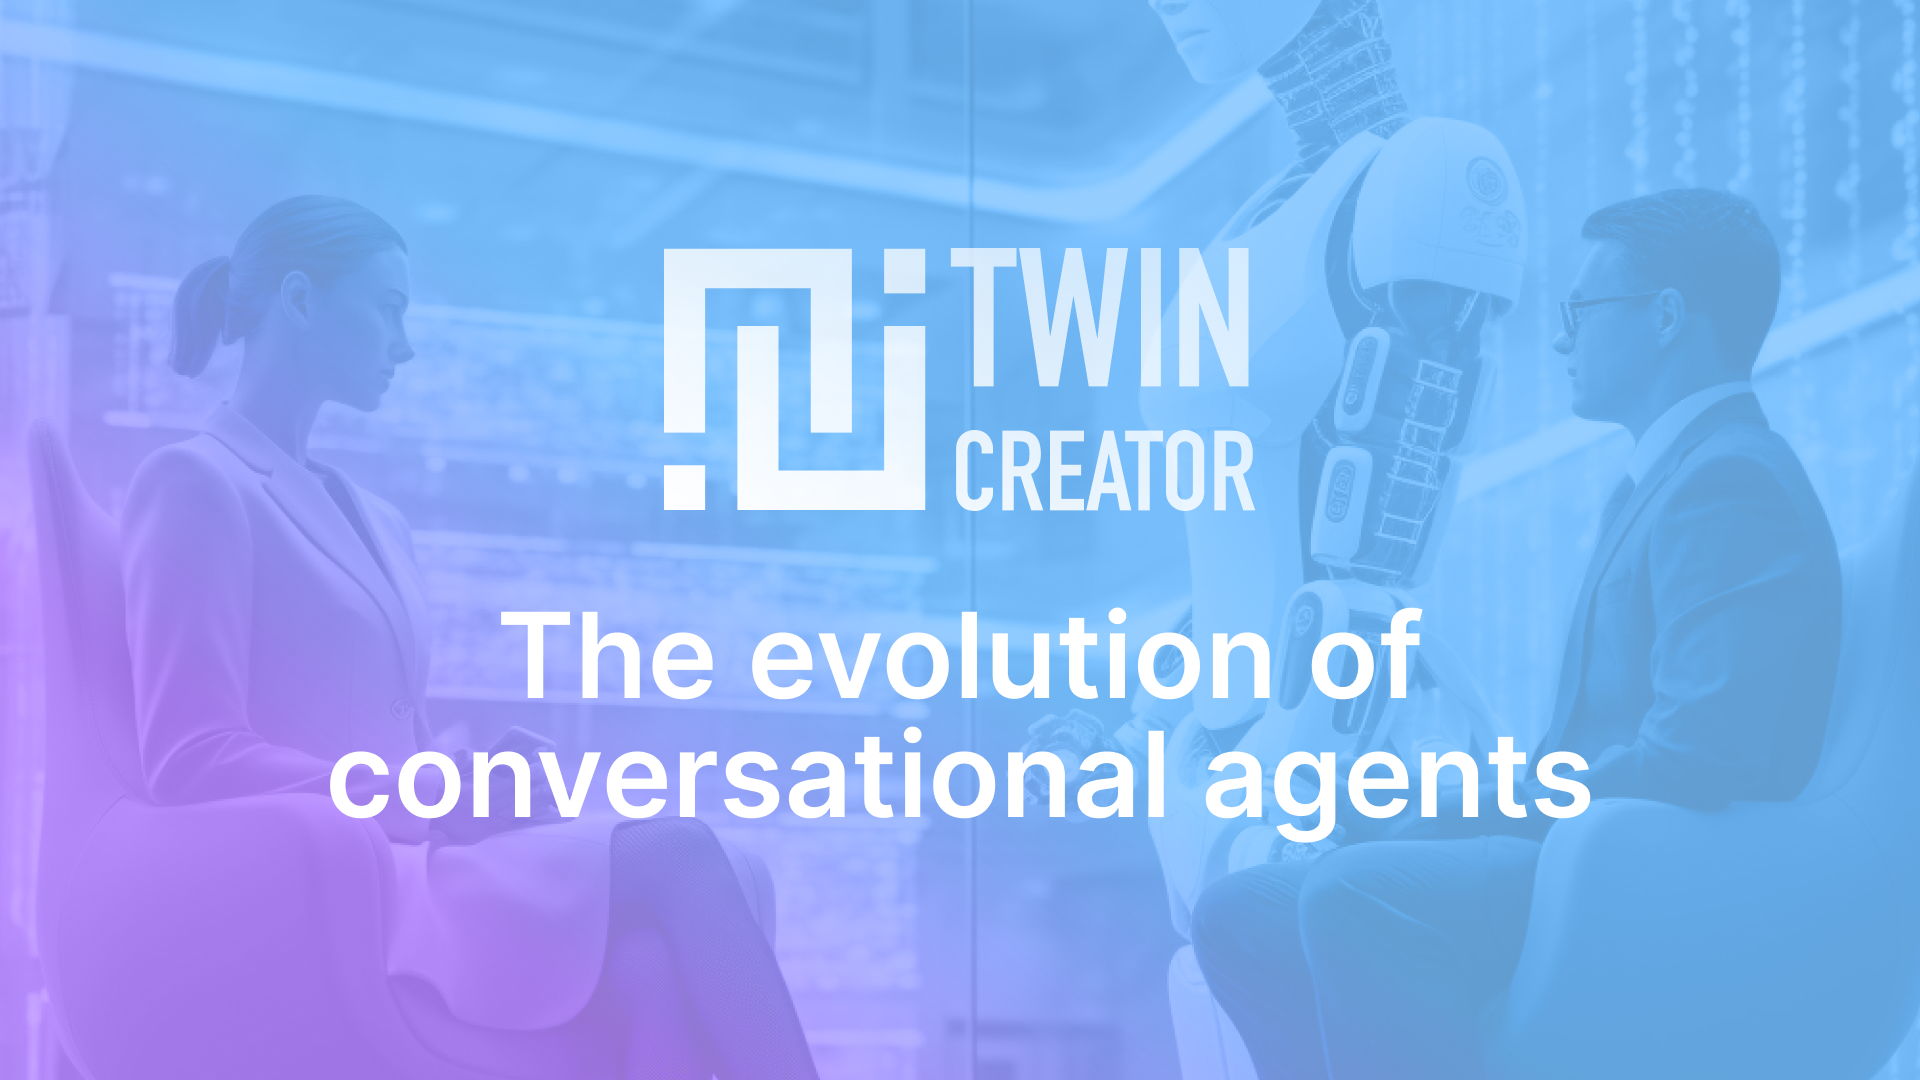 The evolution of conversation: chatbots, AI and what the future holds.